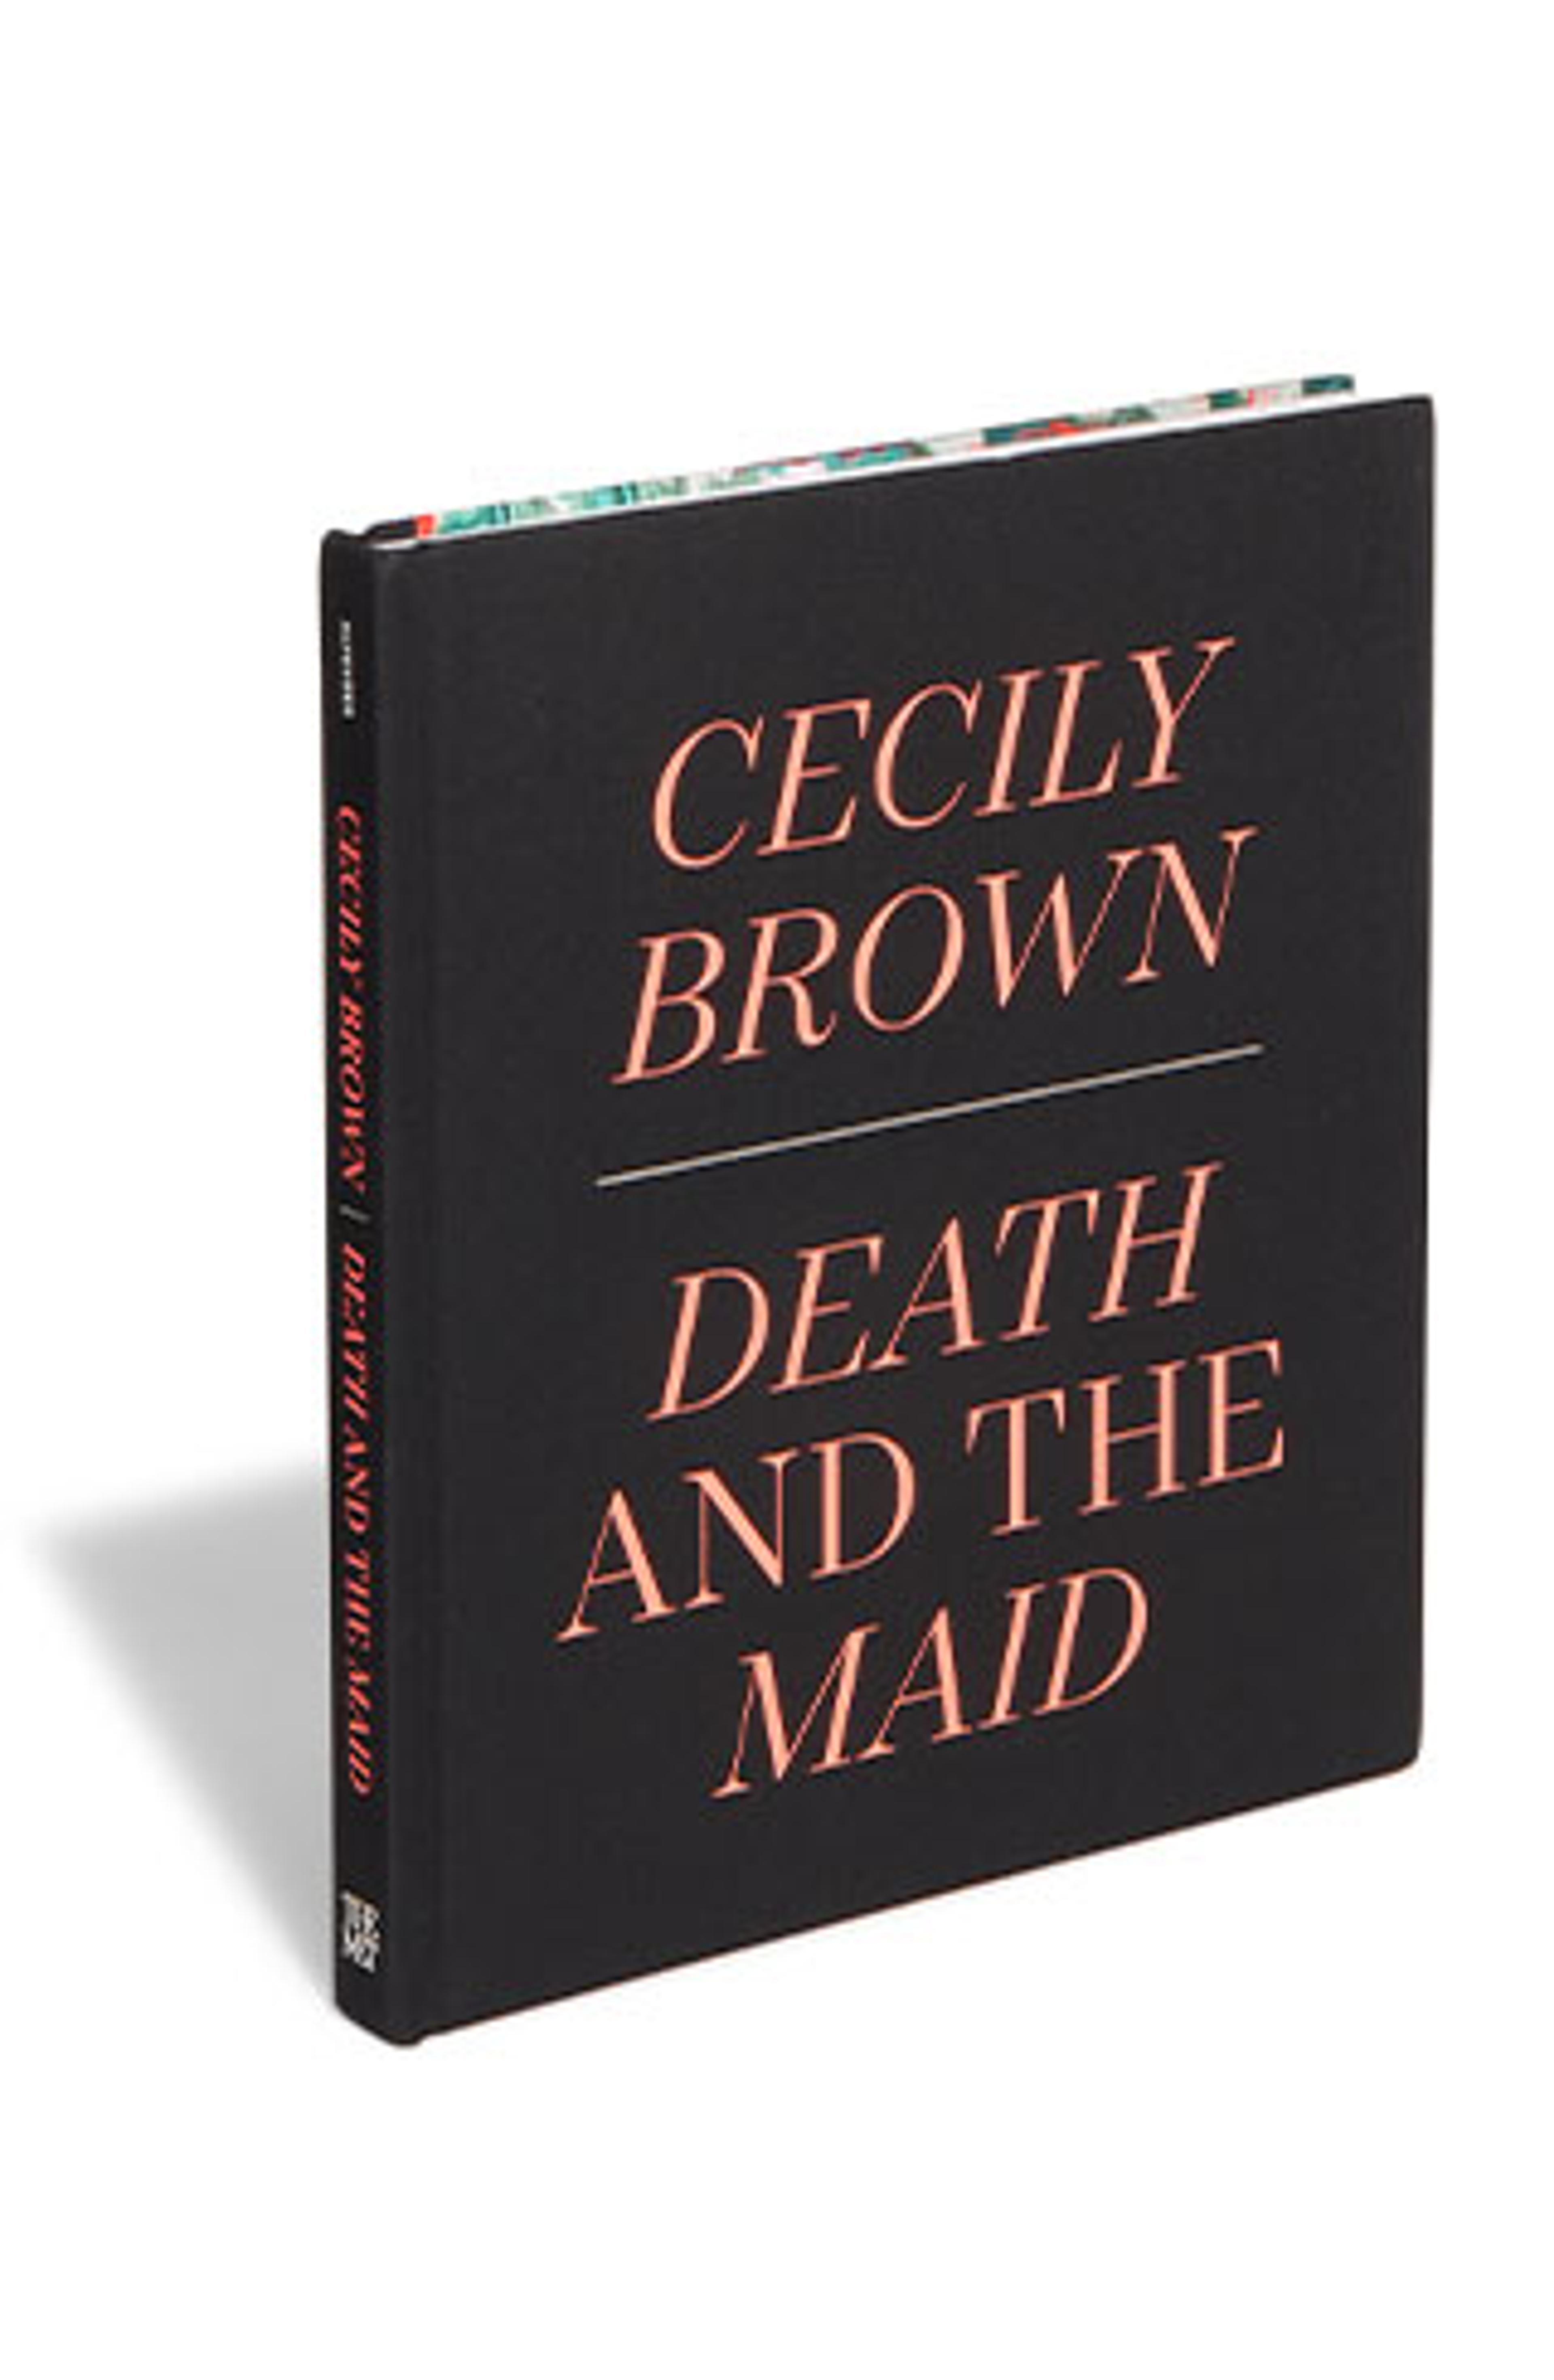 Catalogue that reads: Cecily Brown, Death and the Maid